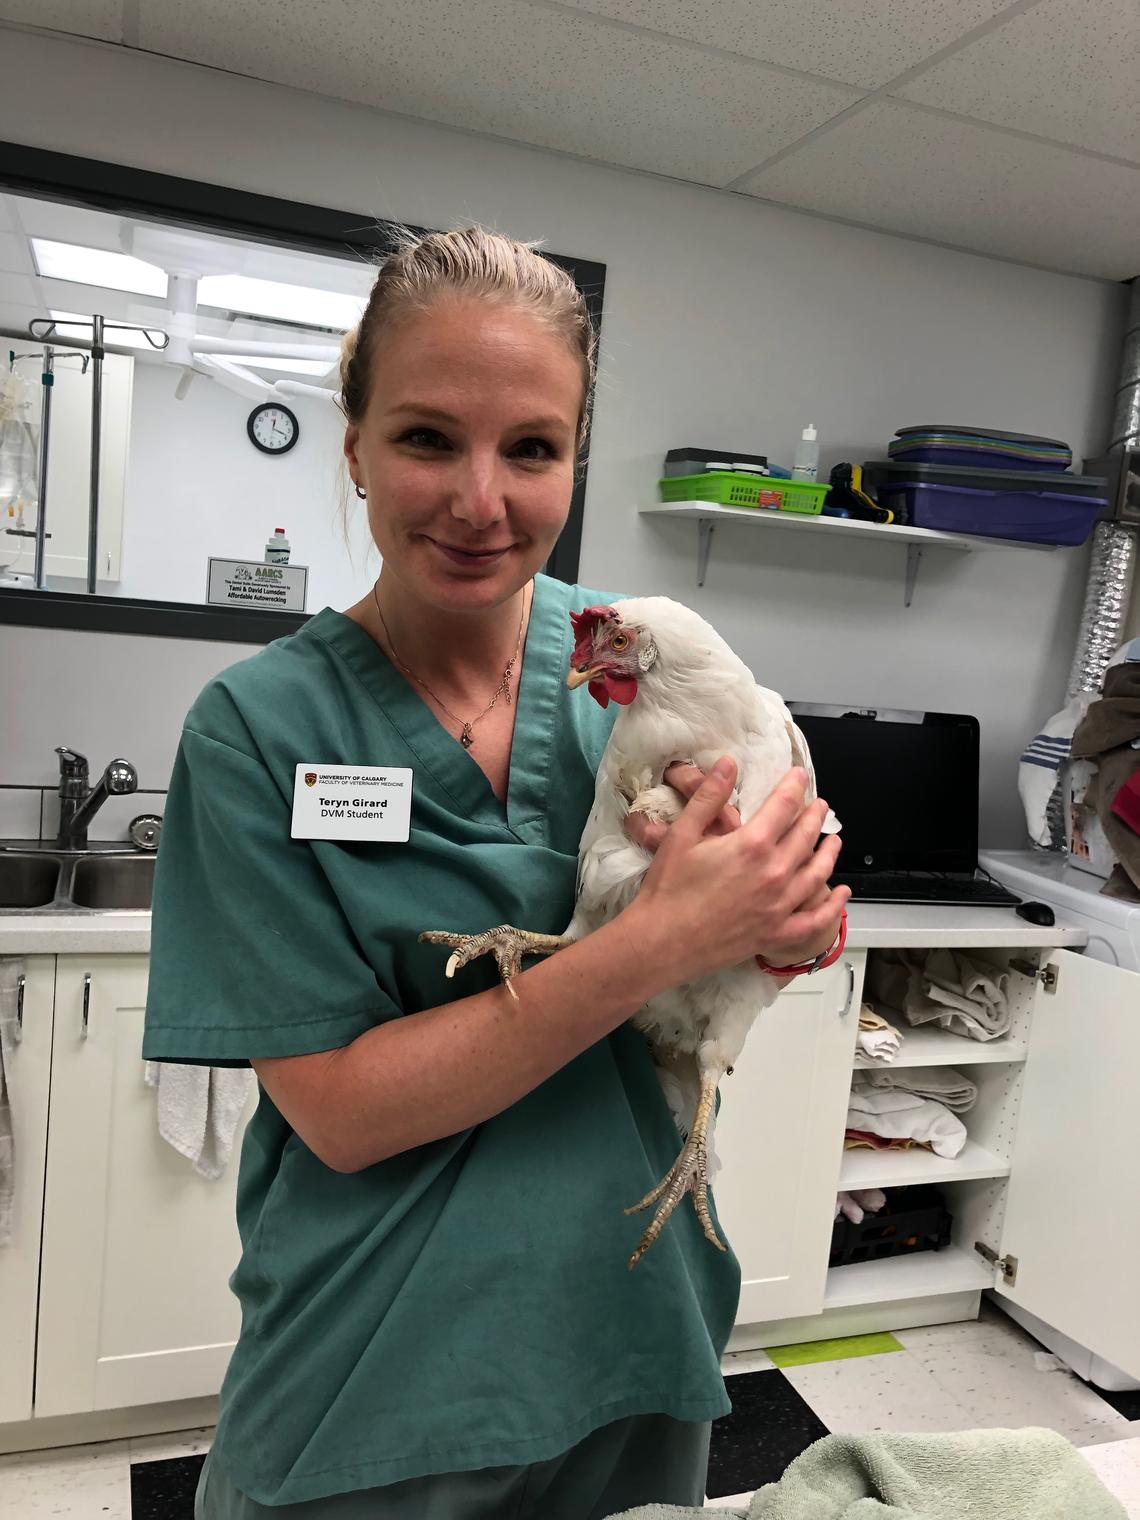 Teryn Girard, UCVM Class of 2019, says chickens are smart and fun and they make her smile.